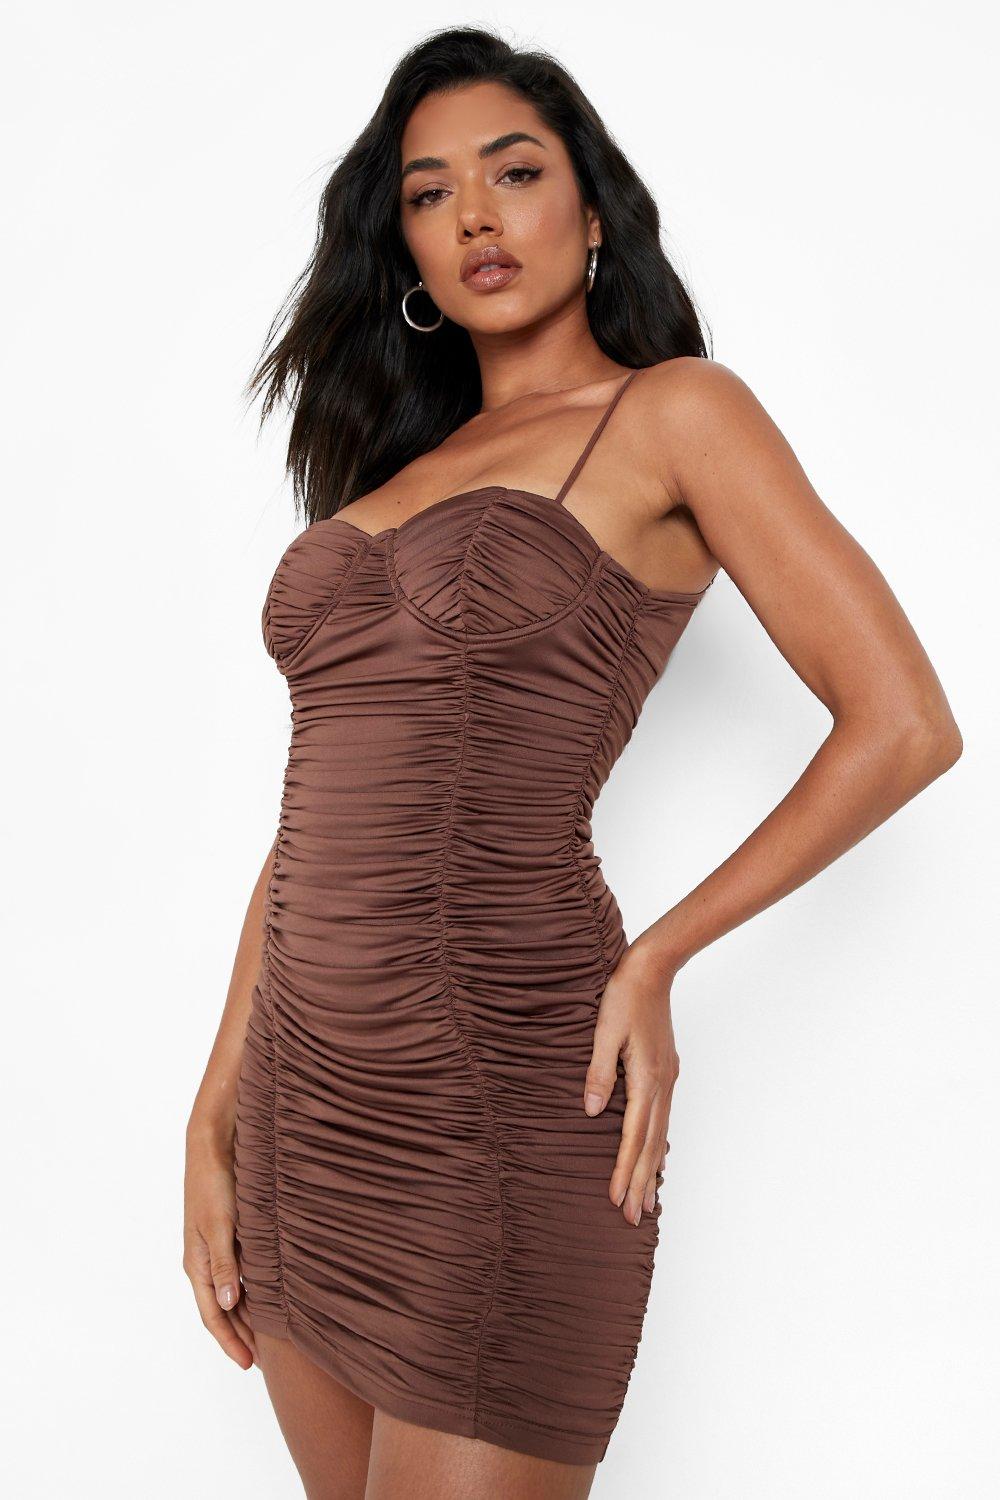 Over Ruched Strappy Mini Dress | Boohoo ...